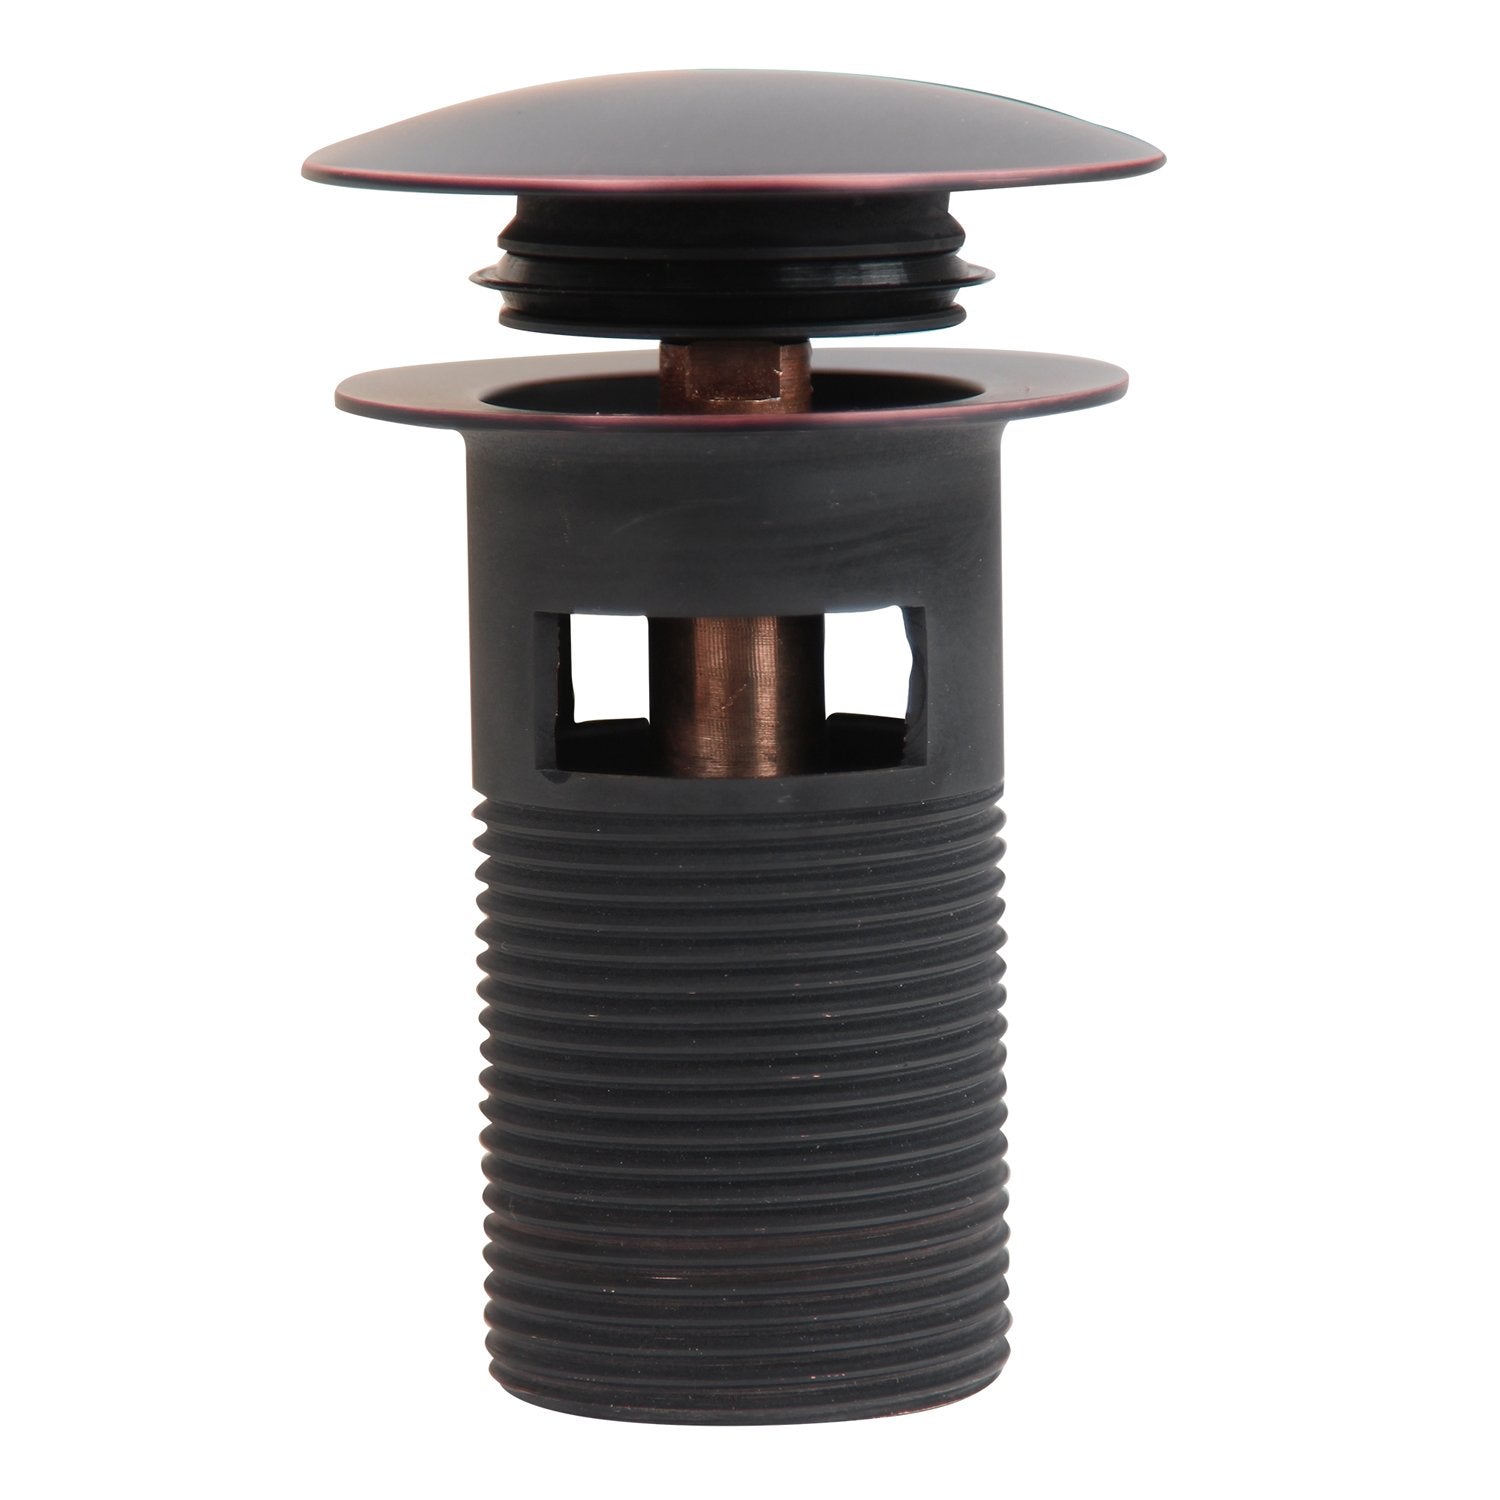 Nantucket Sinks Oil Rubbed Bronze Finish Umbrella Drain With Overflow NS-UDORB-OF